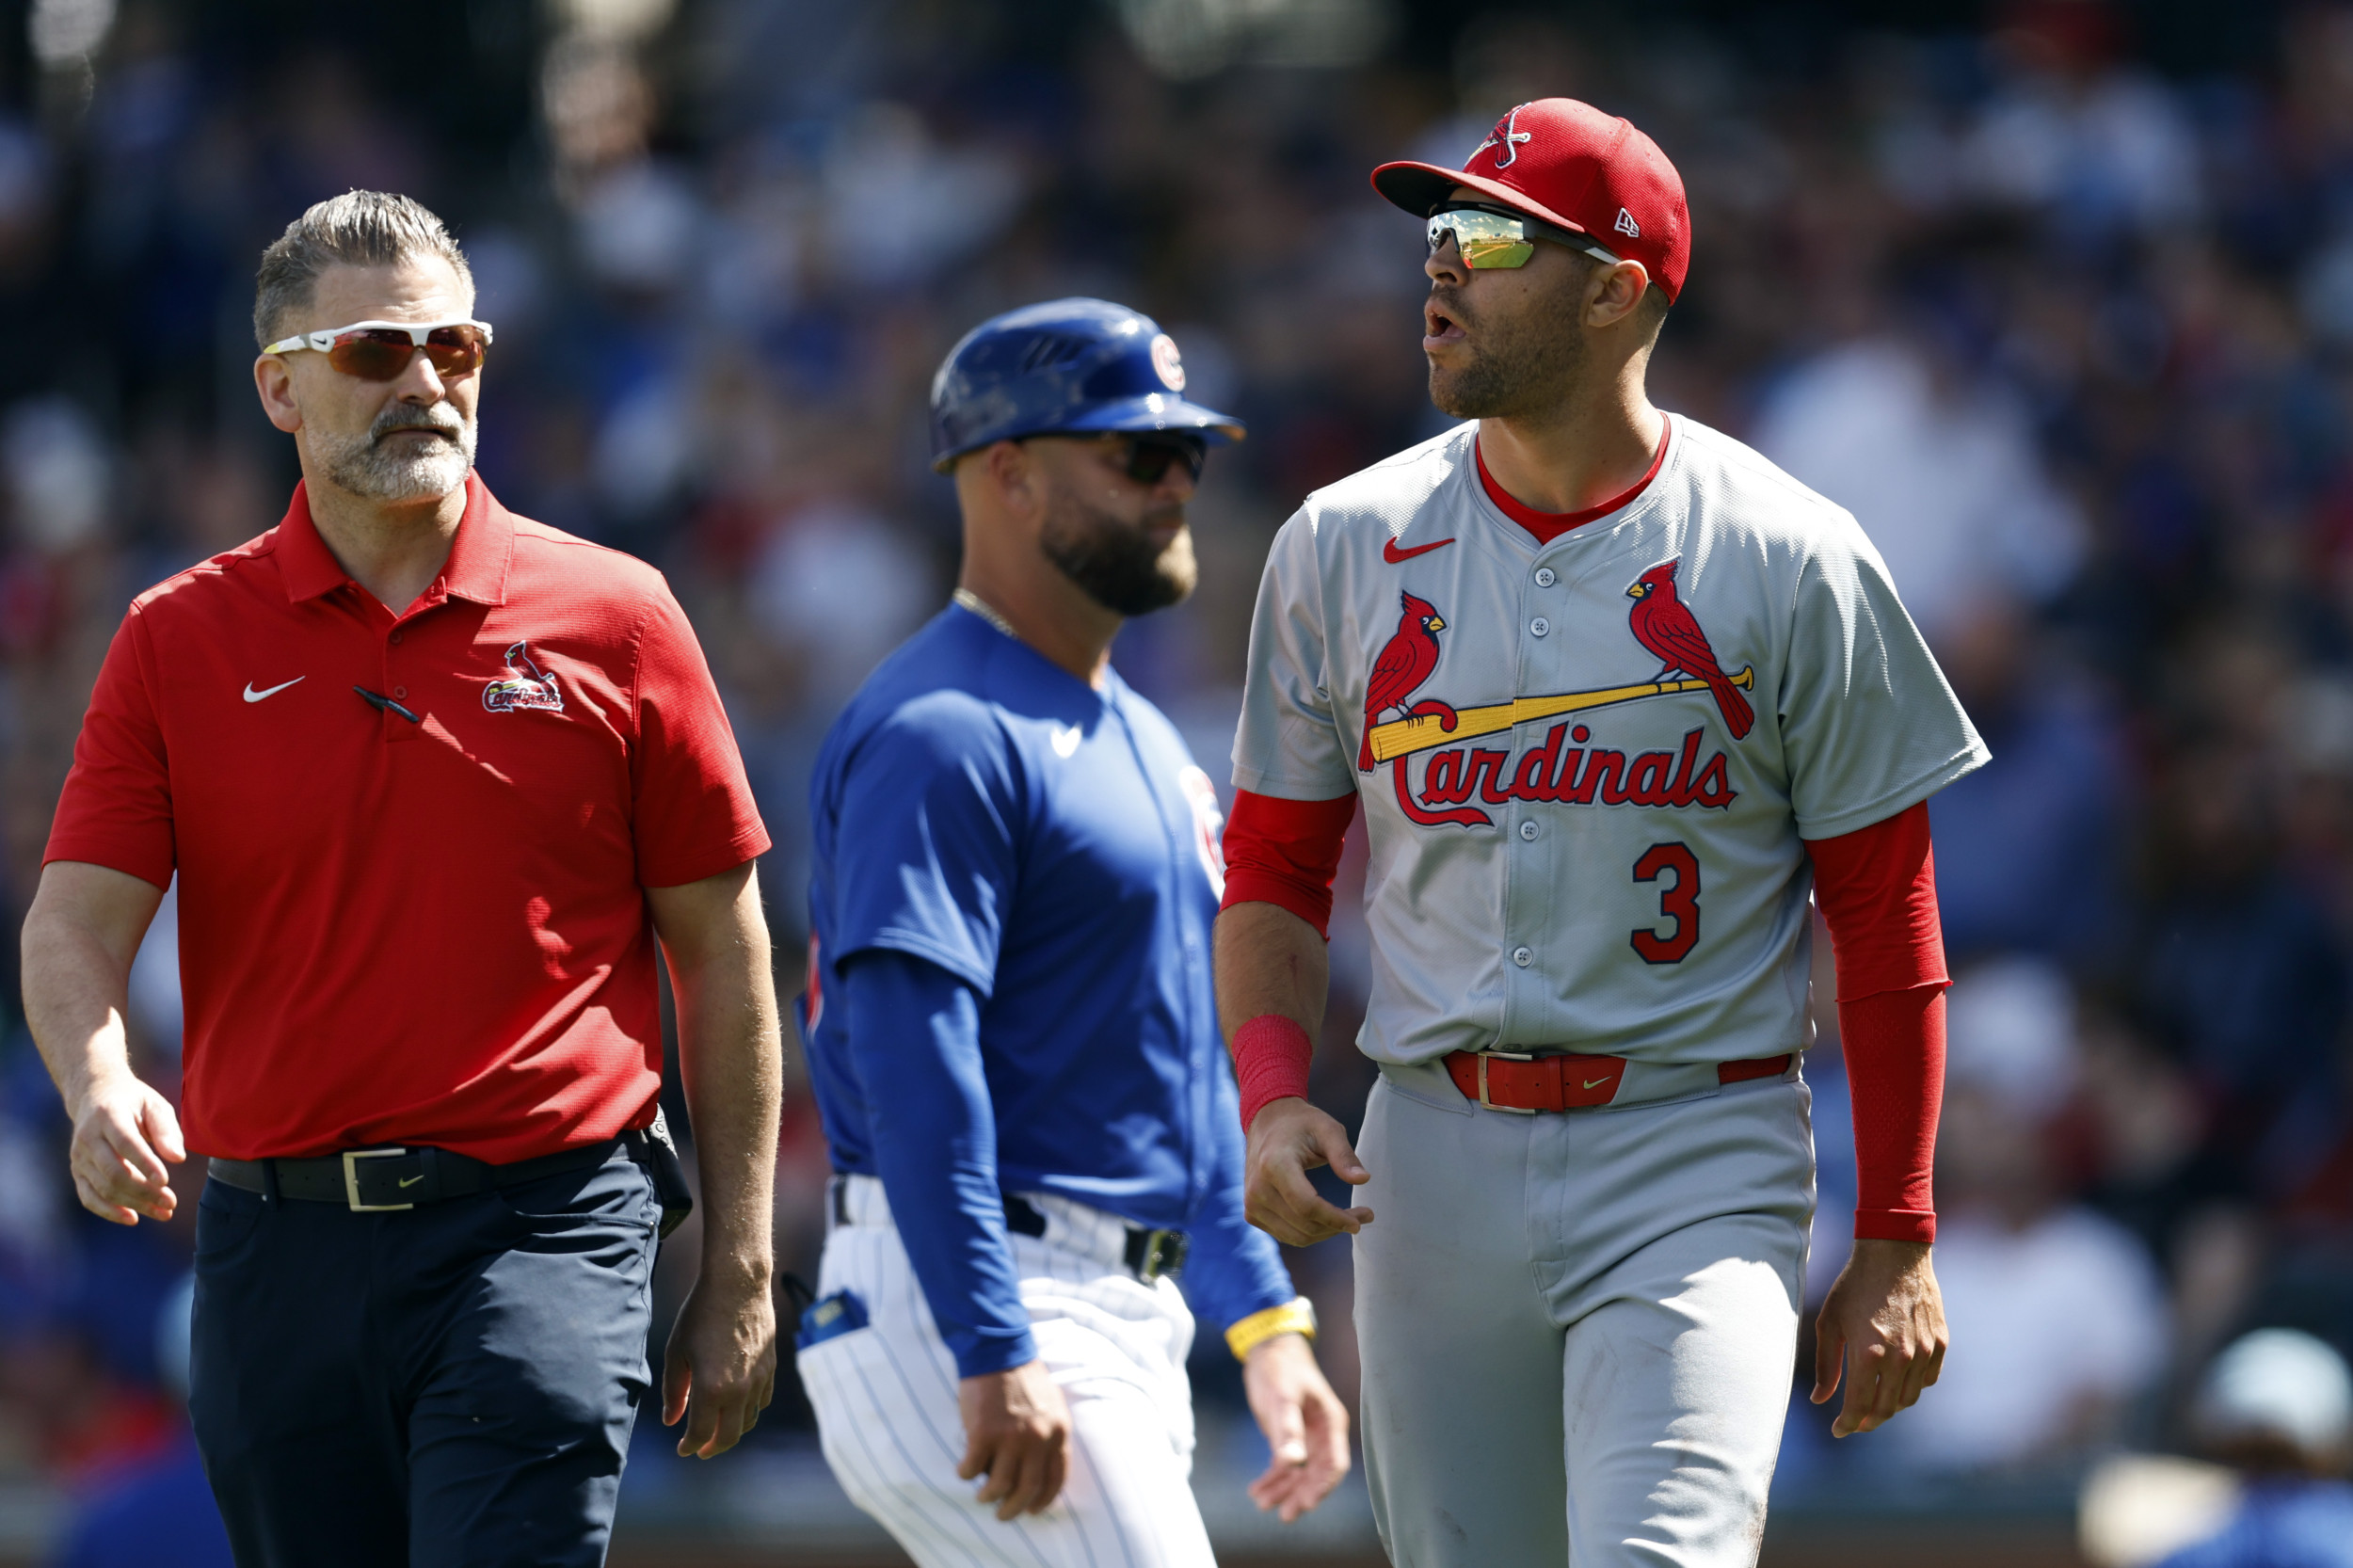 St. Louis Cardinals’ Dylan Carlson’s Opening Day Status in Doubt after Scary Collision [Video]